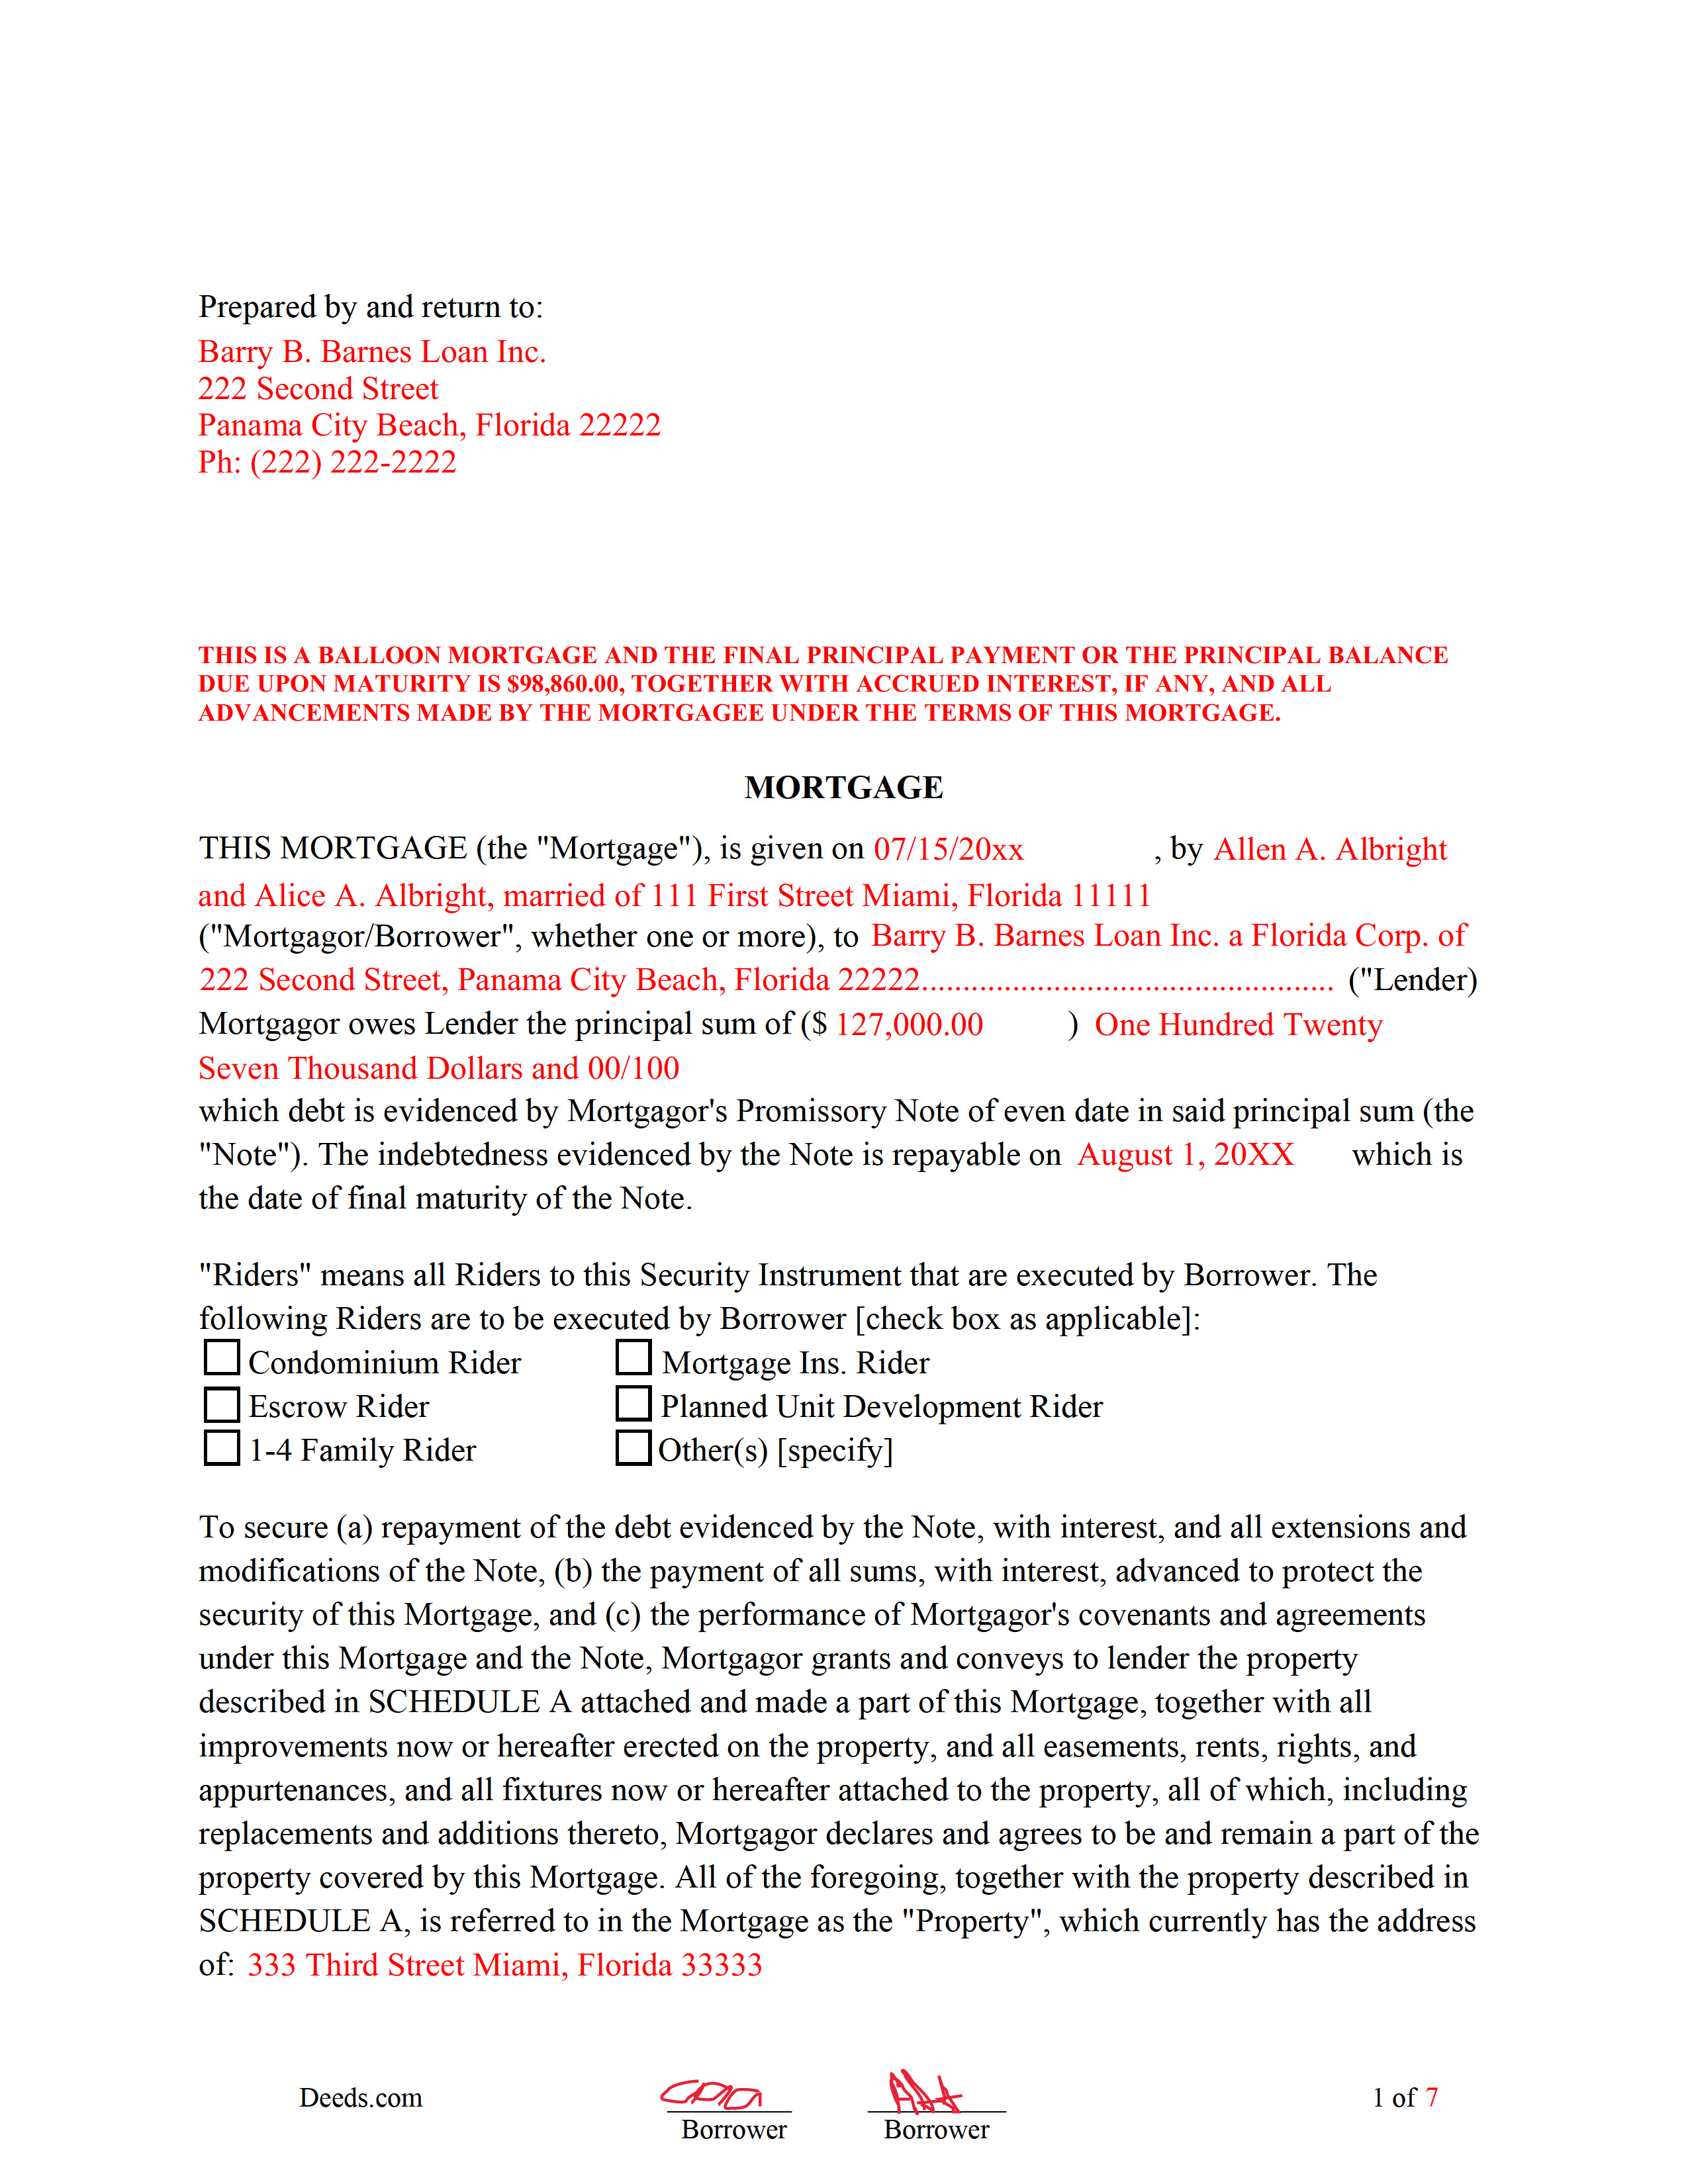 Completed Example of the Mortgage Instrument and Promissory Note Document